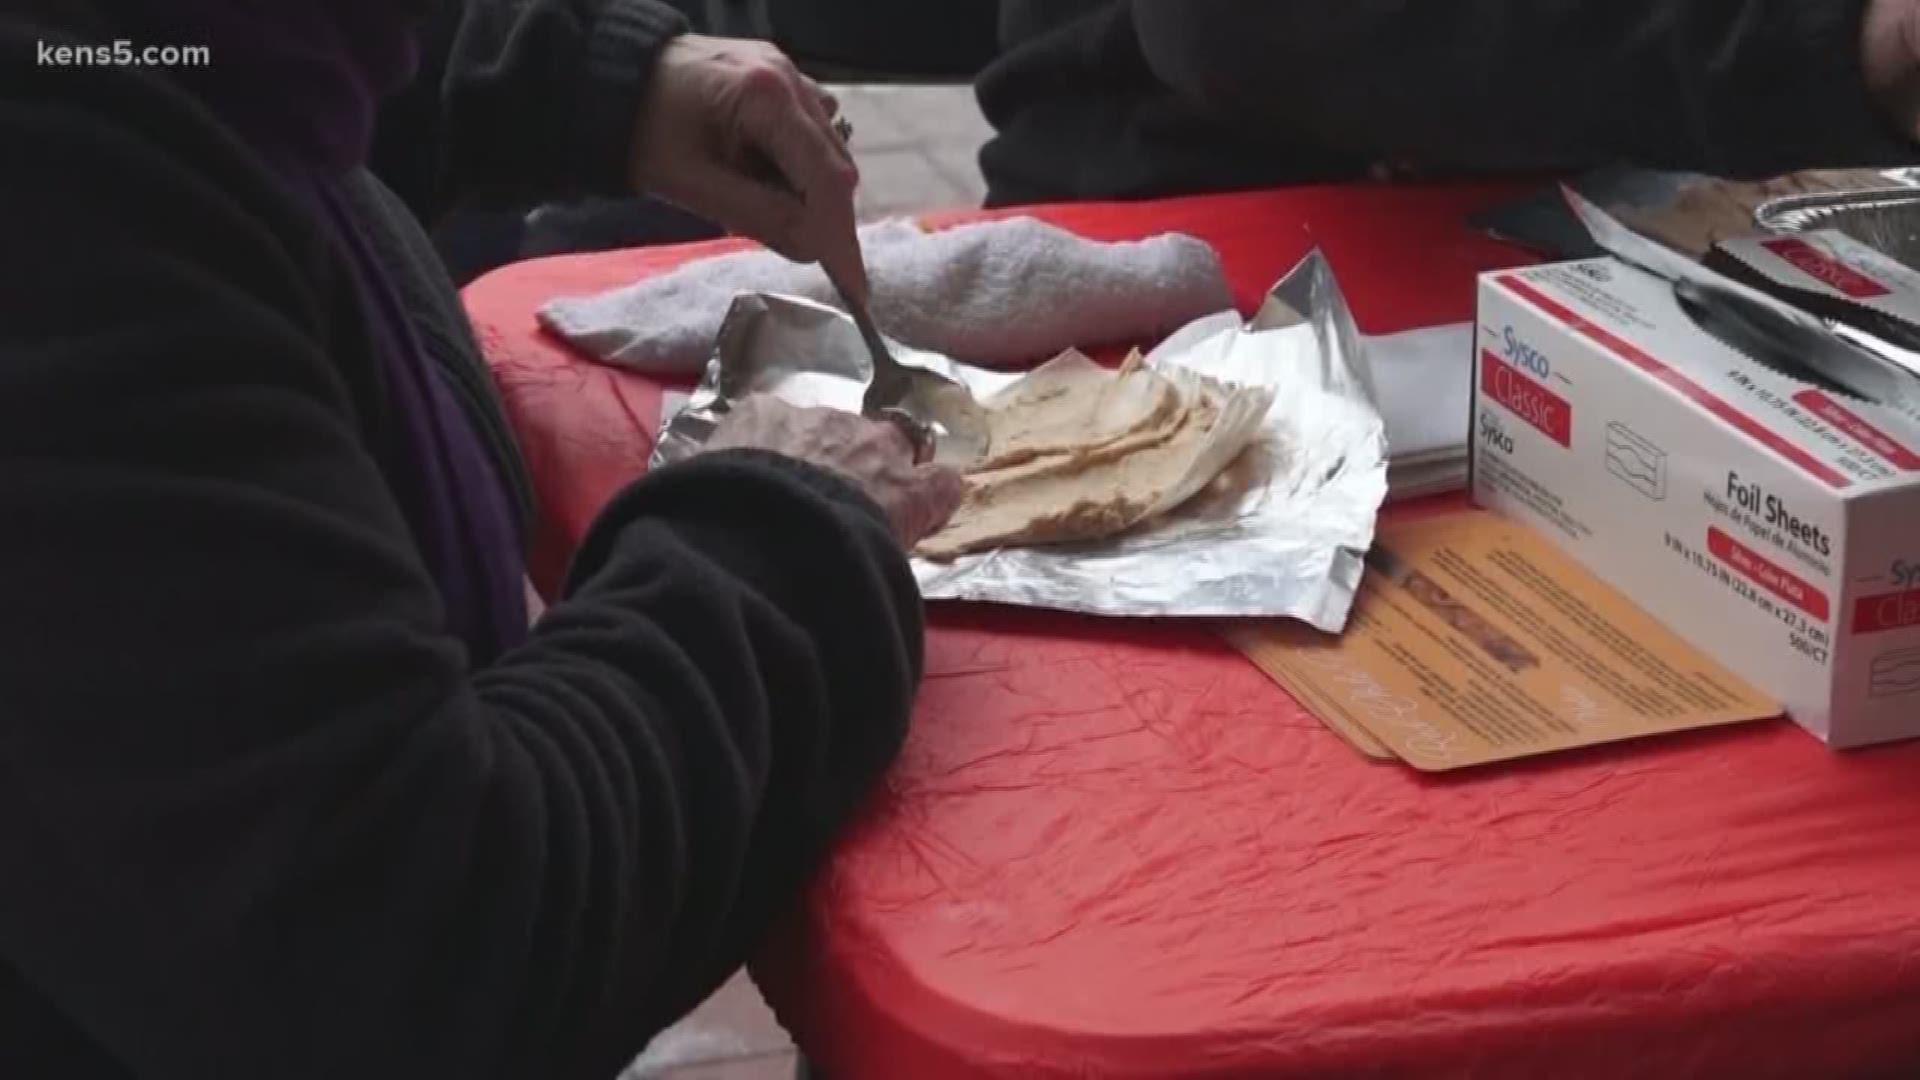 Saturday, some San Antonians and visitors to the city got a taste of Christmas tradition - filled with tamales!